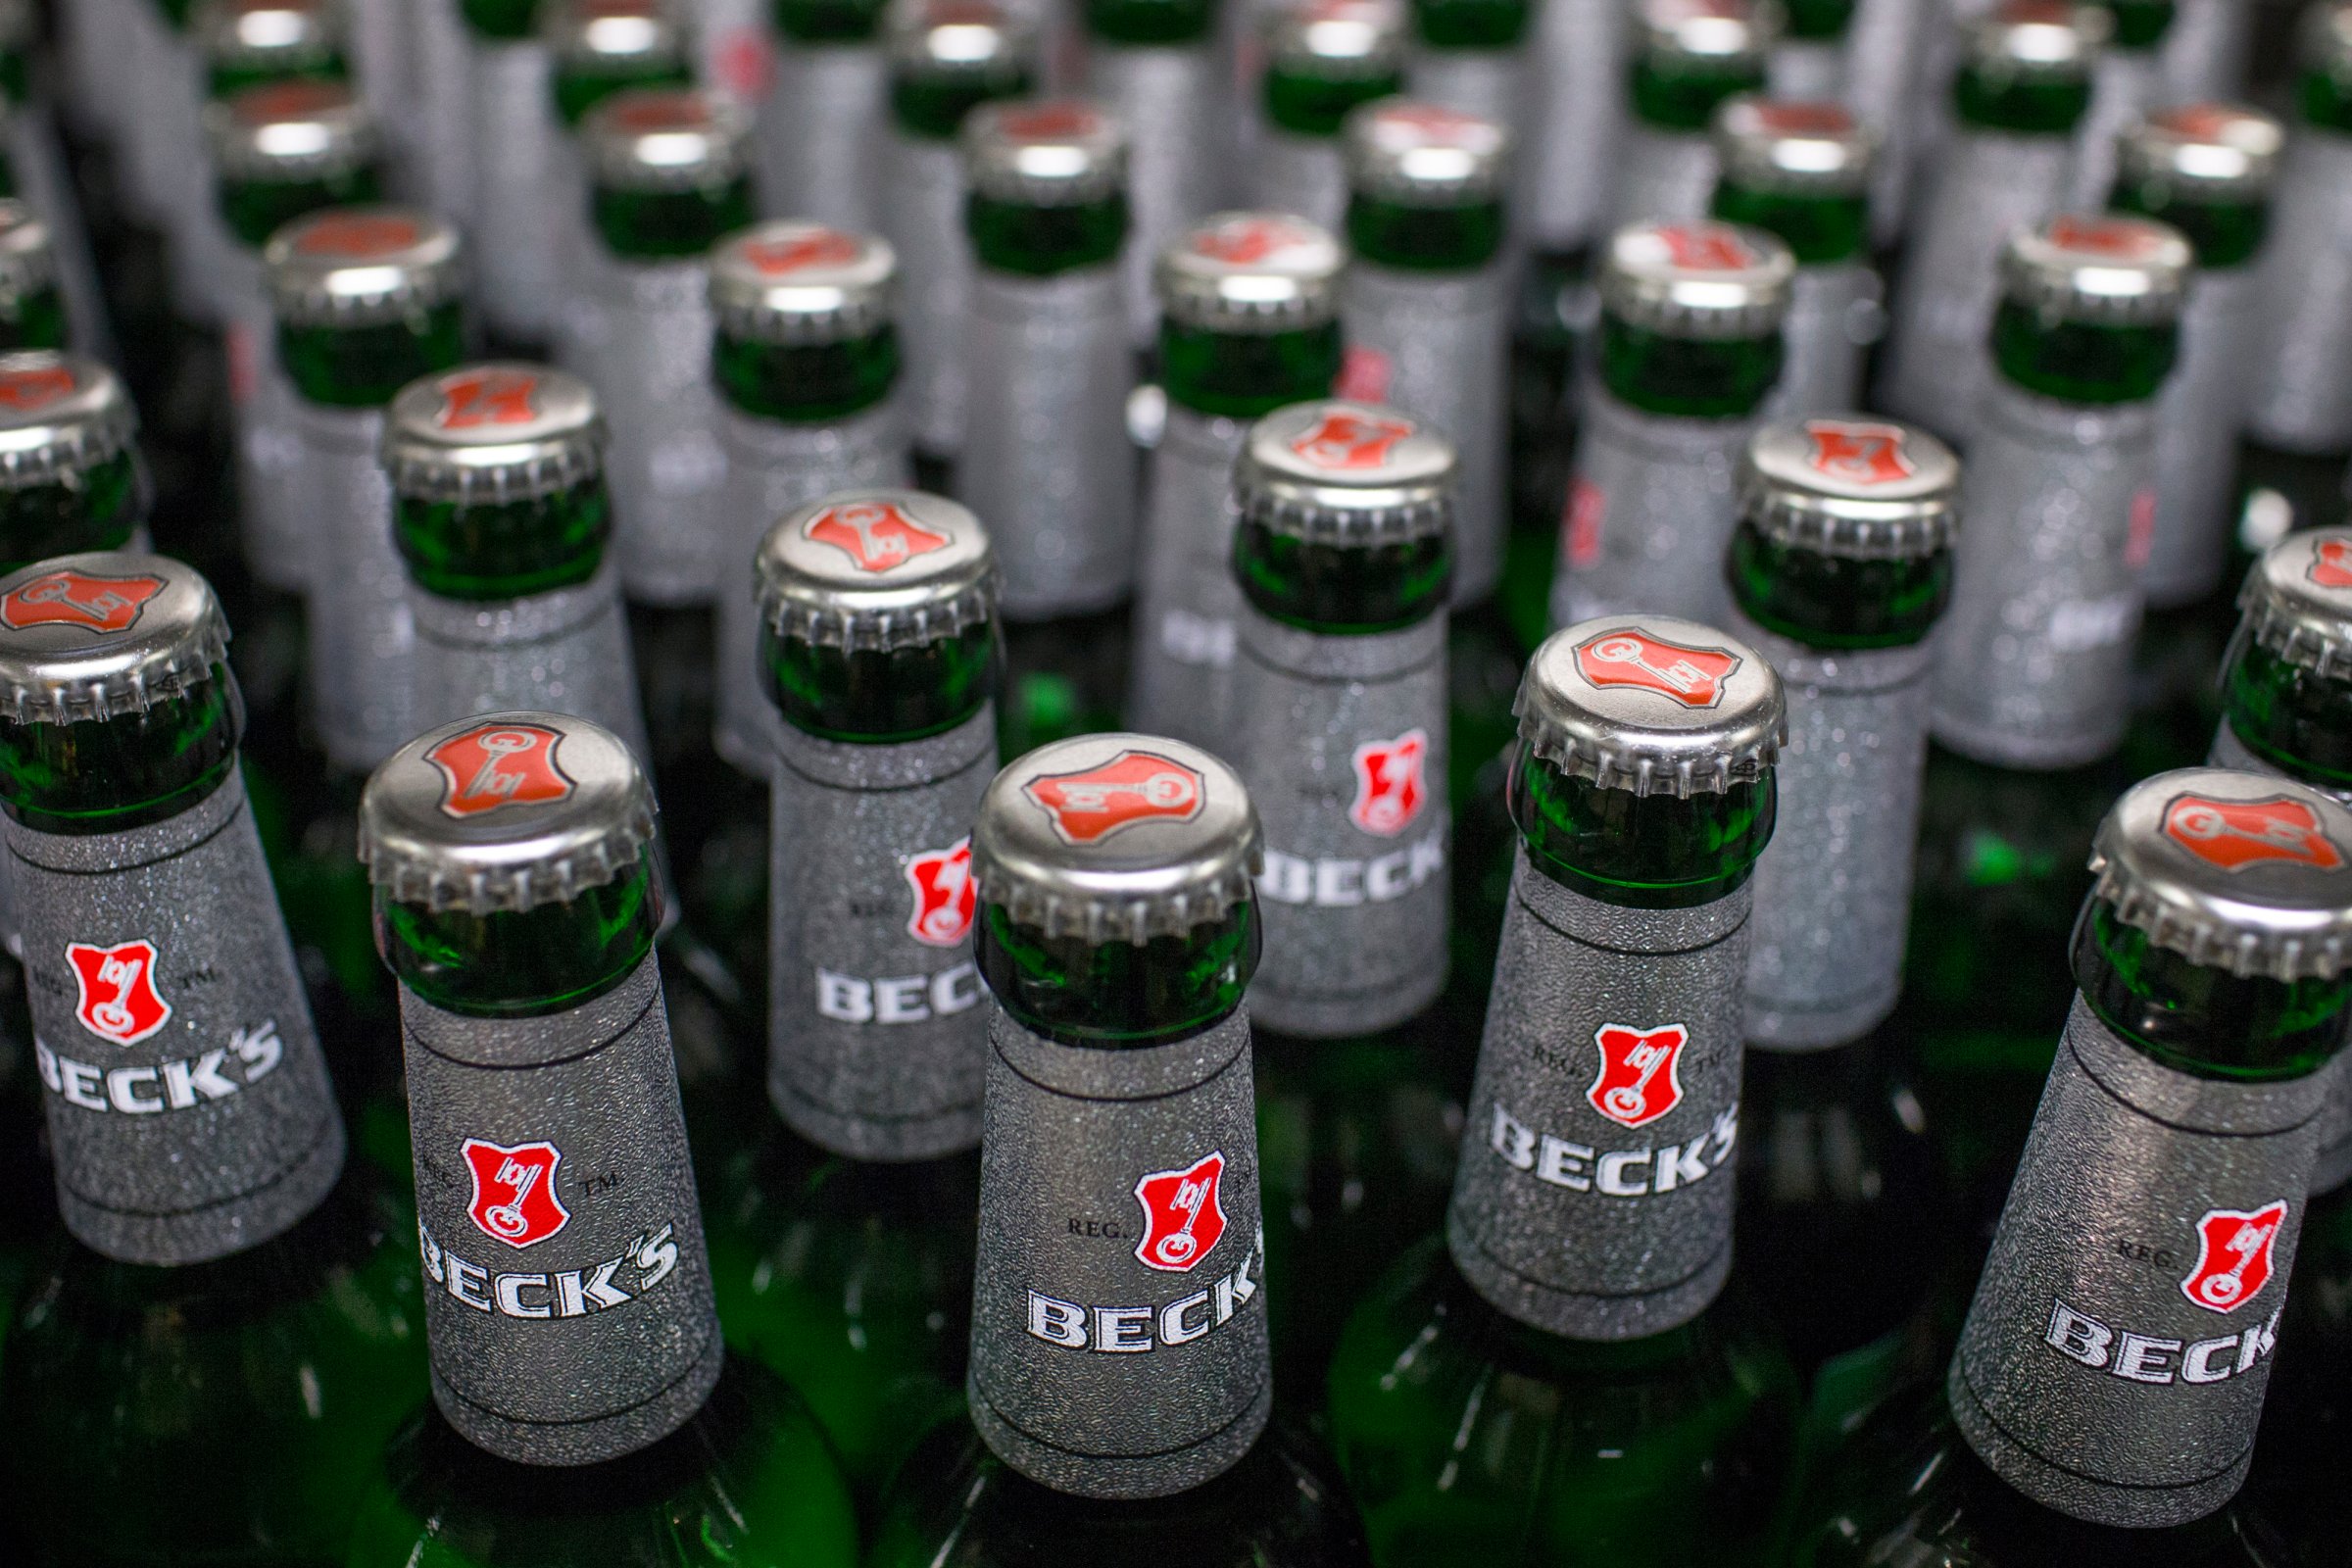 Bottles of Beck's lager beer move along the production line